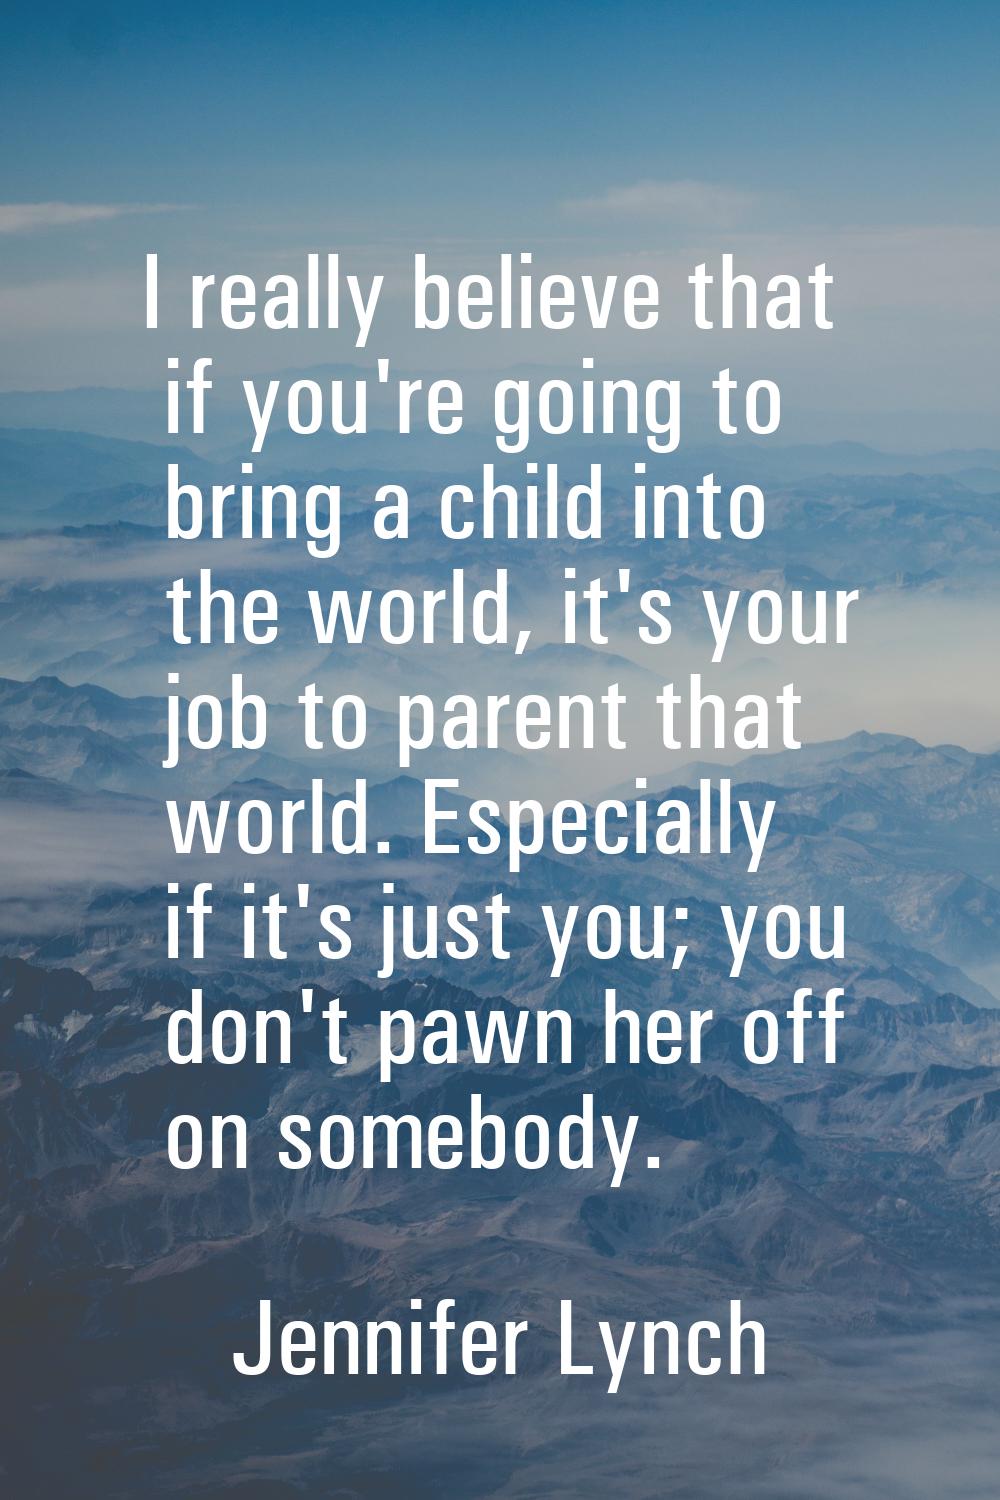 I really believe that if you're going to bring a child into the world, it's your job to parent that